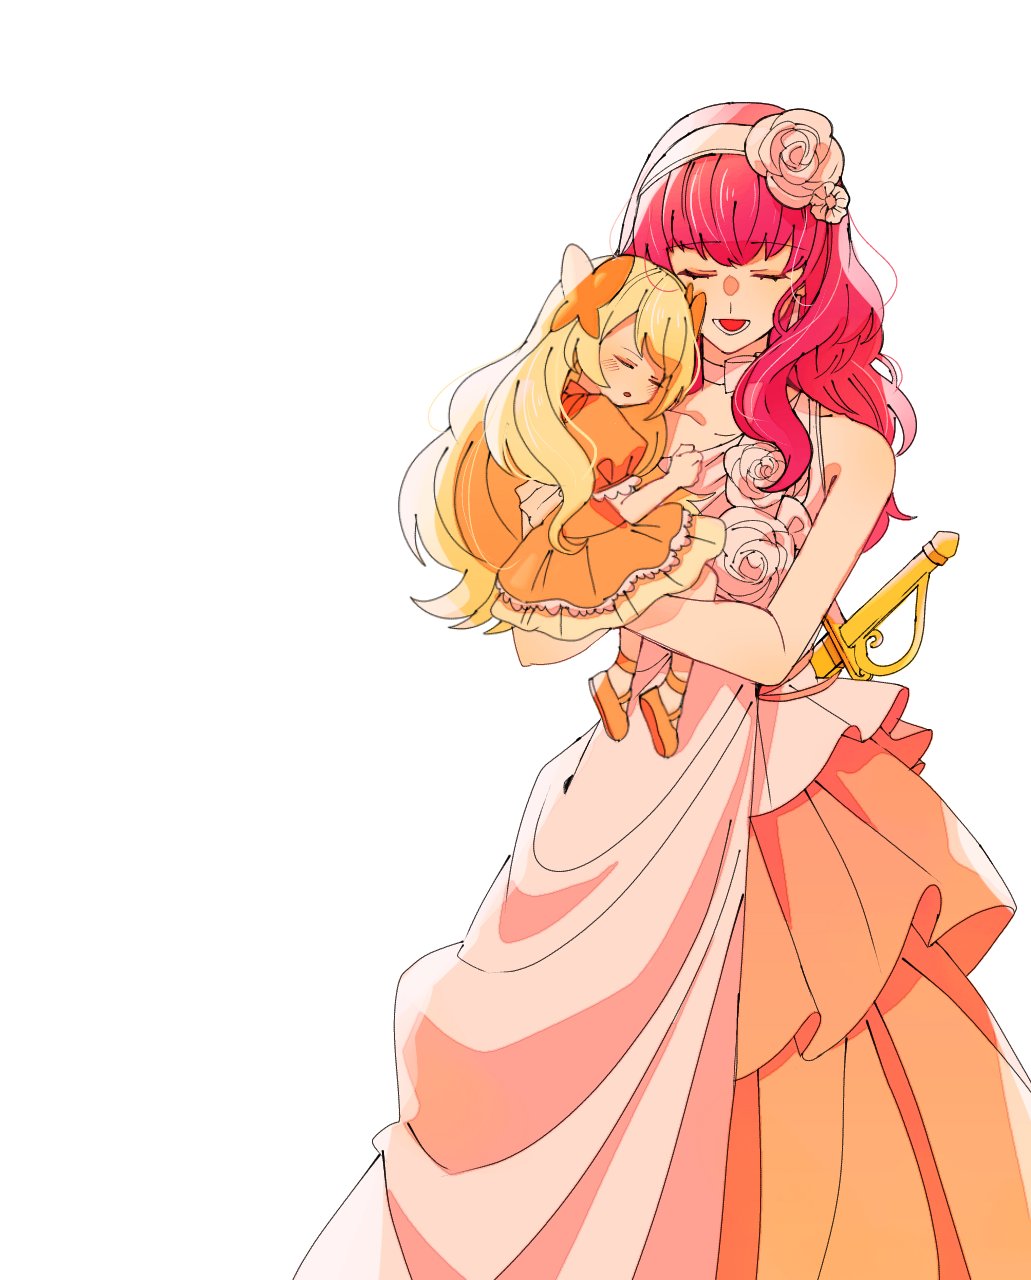 2girls :o aged_down blonde_hair carrying carrying_person celica_(fire_emblem) celine_(fire_emblem) closed_eyes commentary_request dress e8coofn0klibdx1 fire_emblem fire_emblem_echoes:_shadows_of_valentia fire_emblem_engage hair_ornament hairband highres long_hair multiple_girls open_mouth orange_dress pink_hairband puffy_short_sleeves puffy_sleeves redhead short_sleeves simple_background sleeveless sleeveless_dress smile sword two-tone_dress weapon white_background white_dress